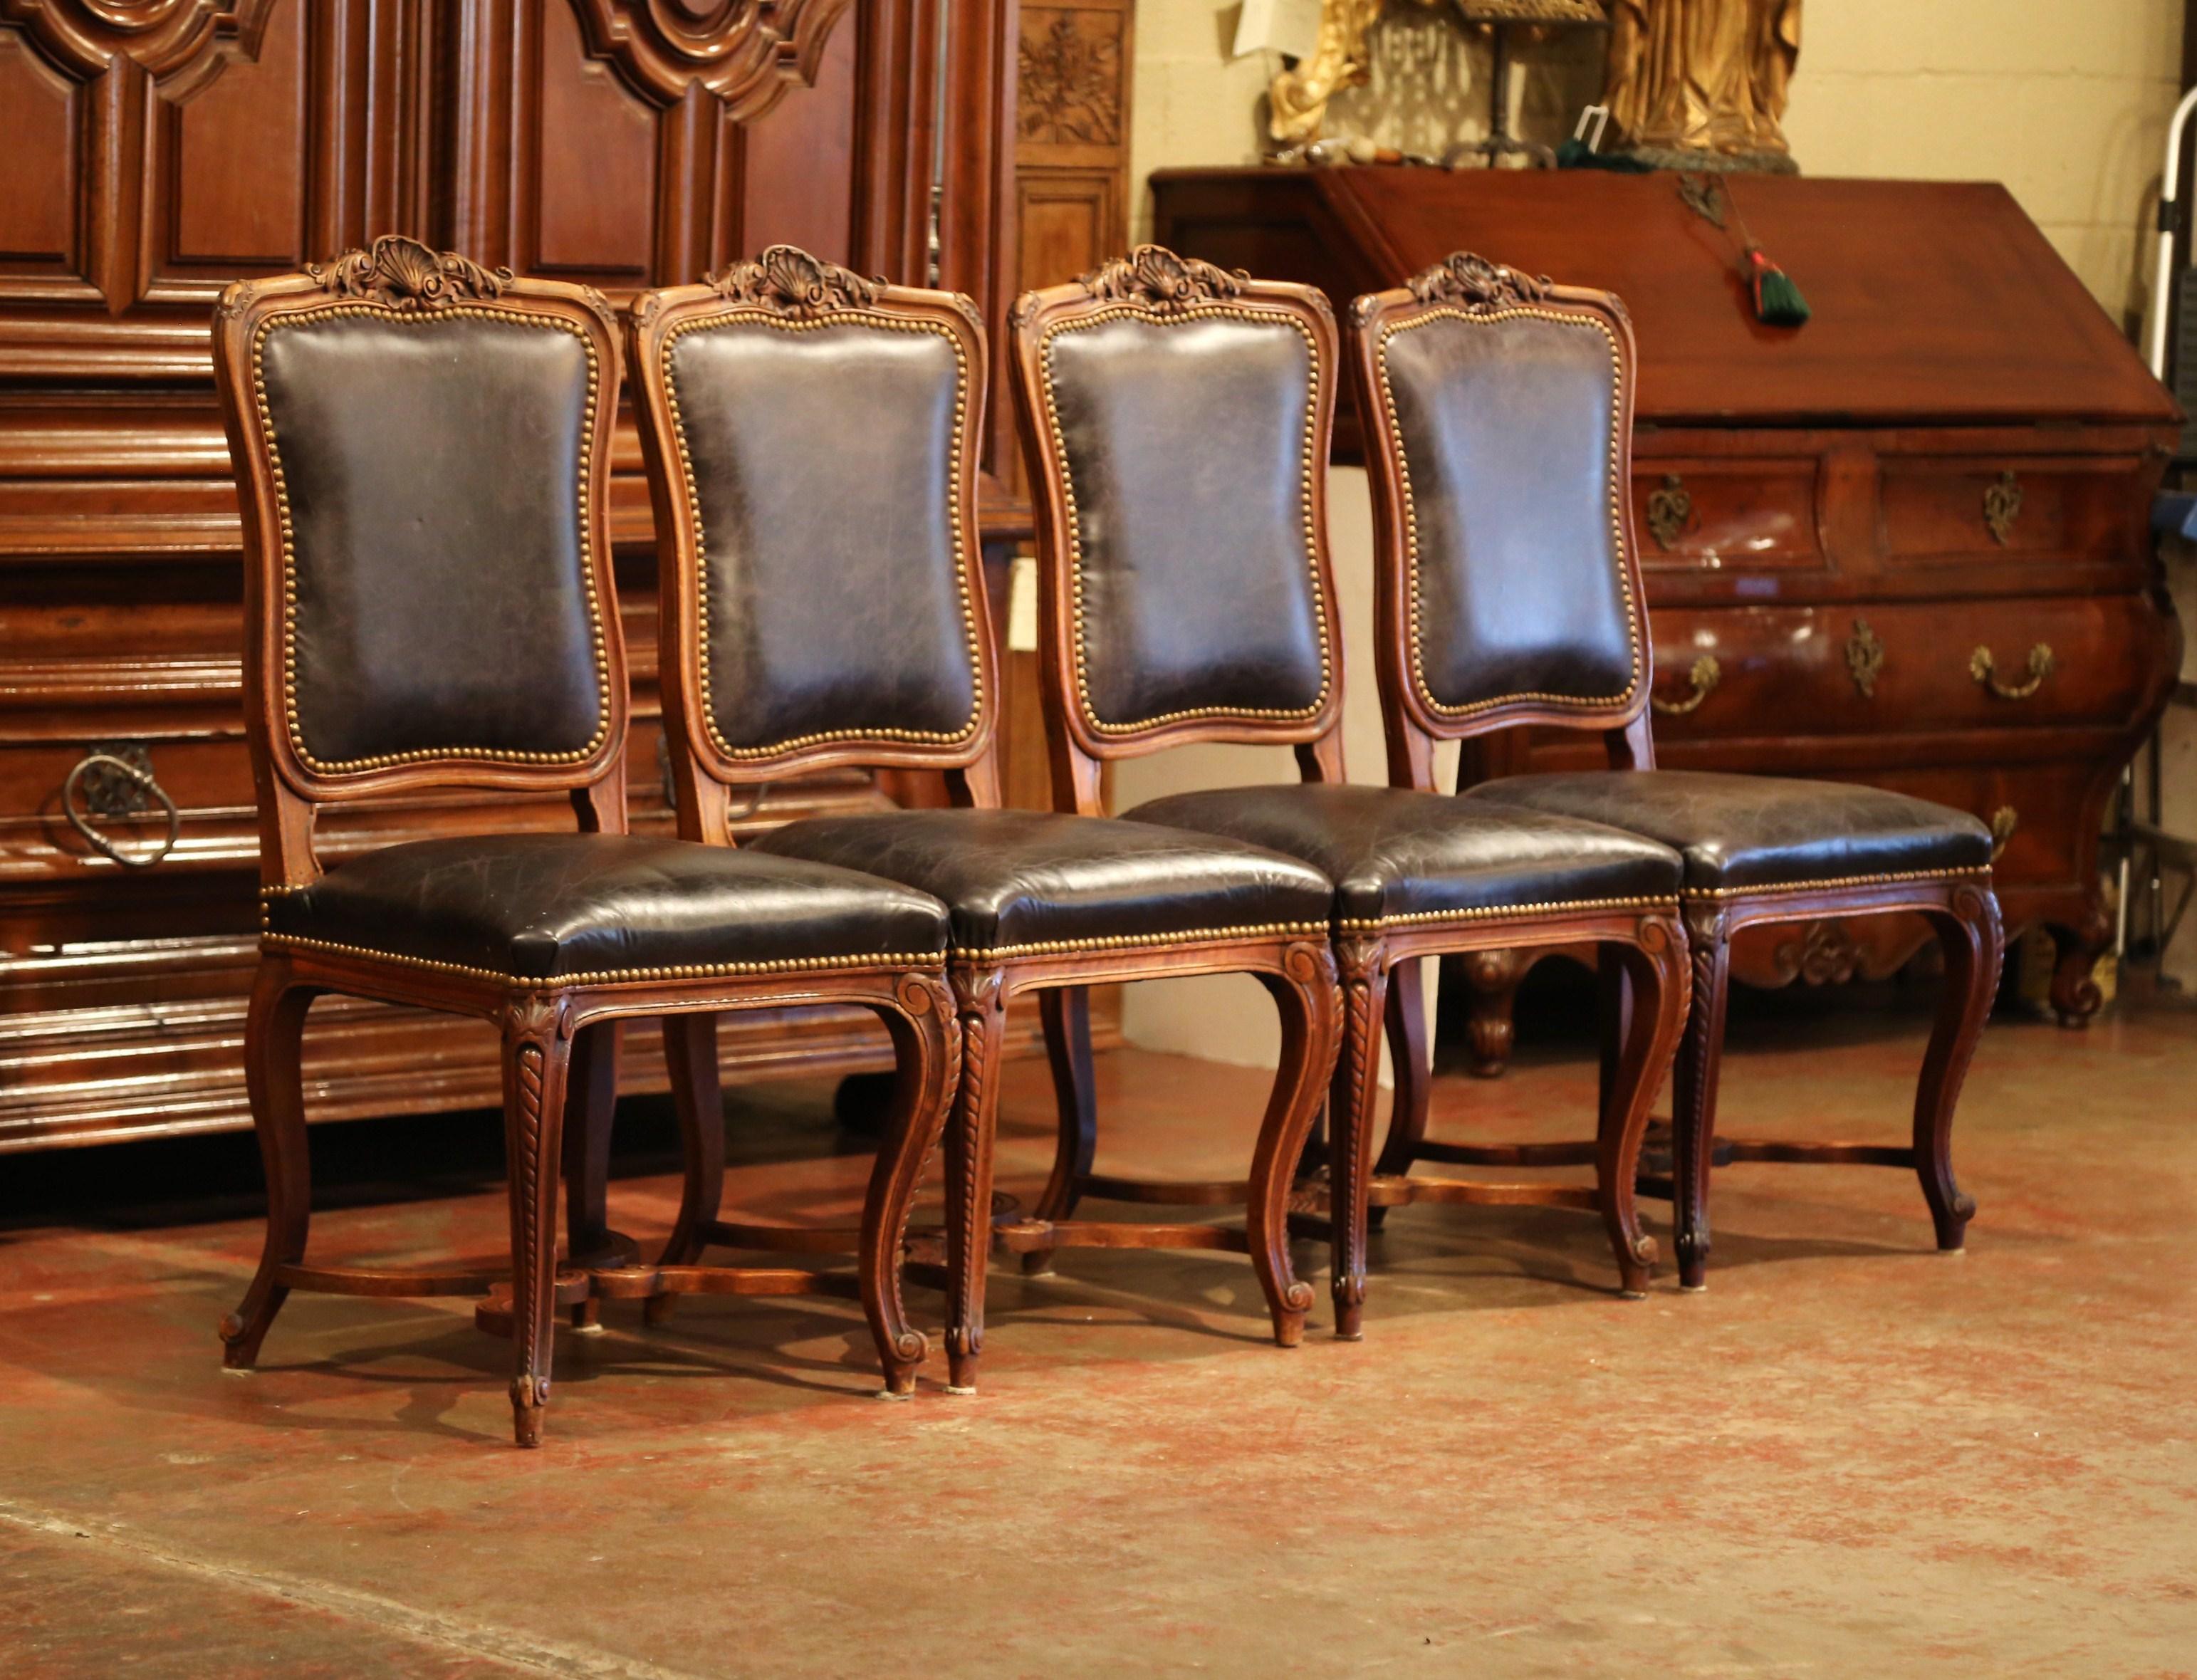 Place this traditional set of four chairs around a game table or in a small breakfast room. Crafted in France, circa 1880, each side chair sits on cabriole legs and has a bottom stretcher with hand carvings around the frame. The carvings include a